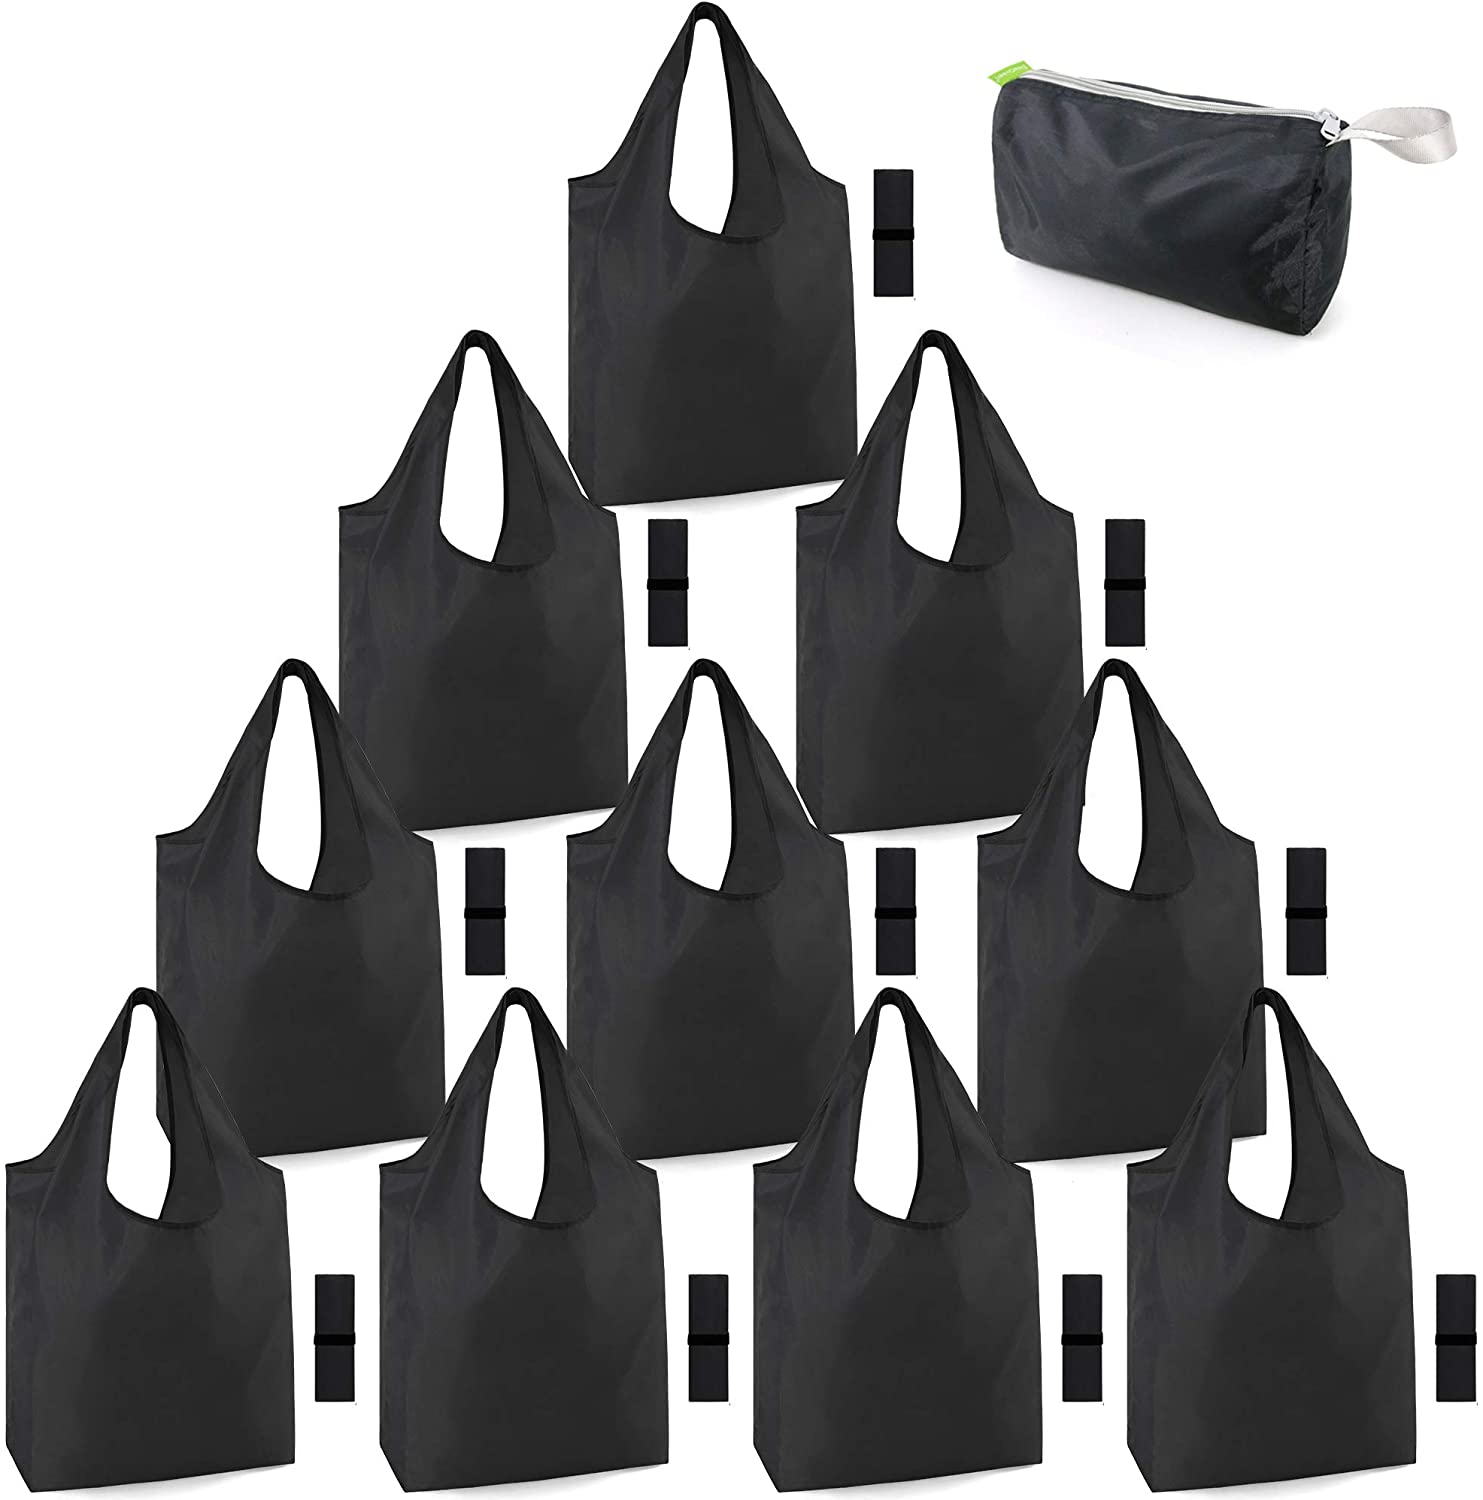 10 Pack Heavy Duty Reusable Grocery Bags Durable Washable Large Shopping Bag